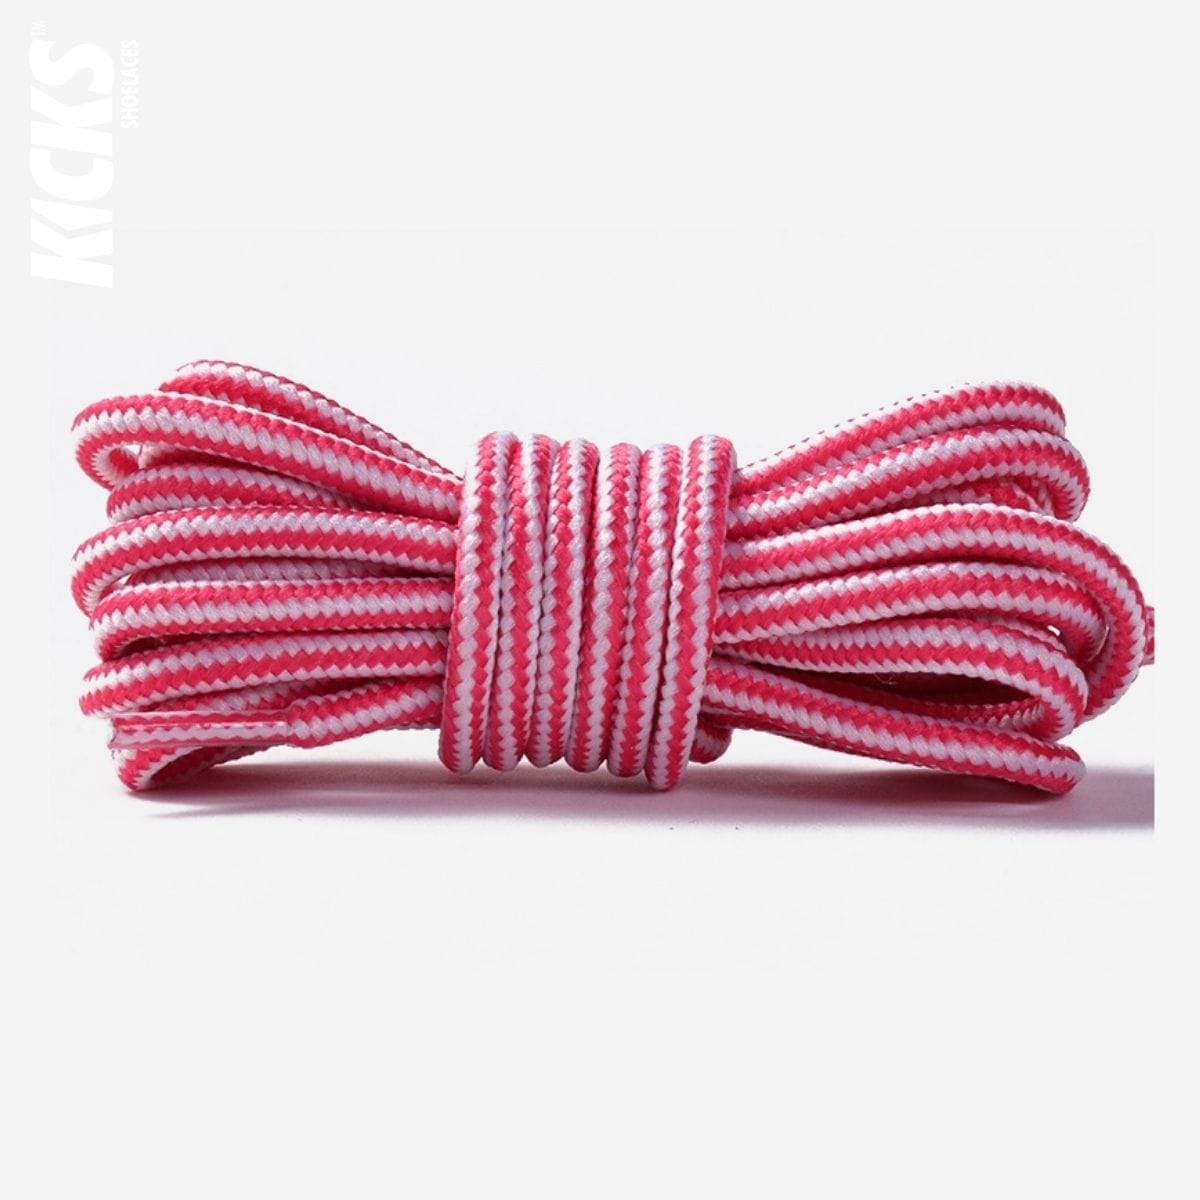 striped-two-color-shoelaces-for-casual-shoes-in-pink-and-white